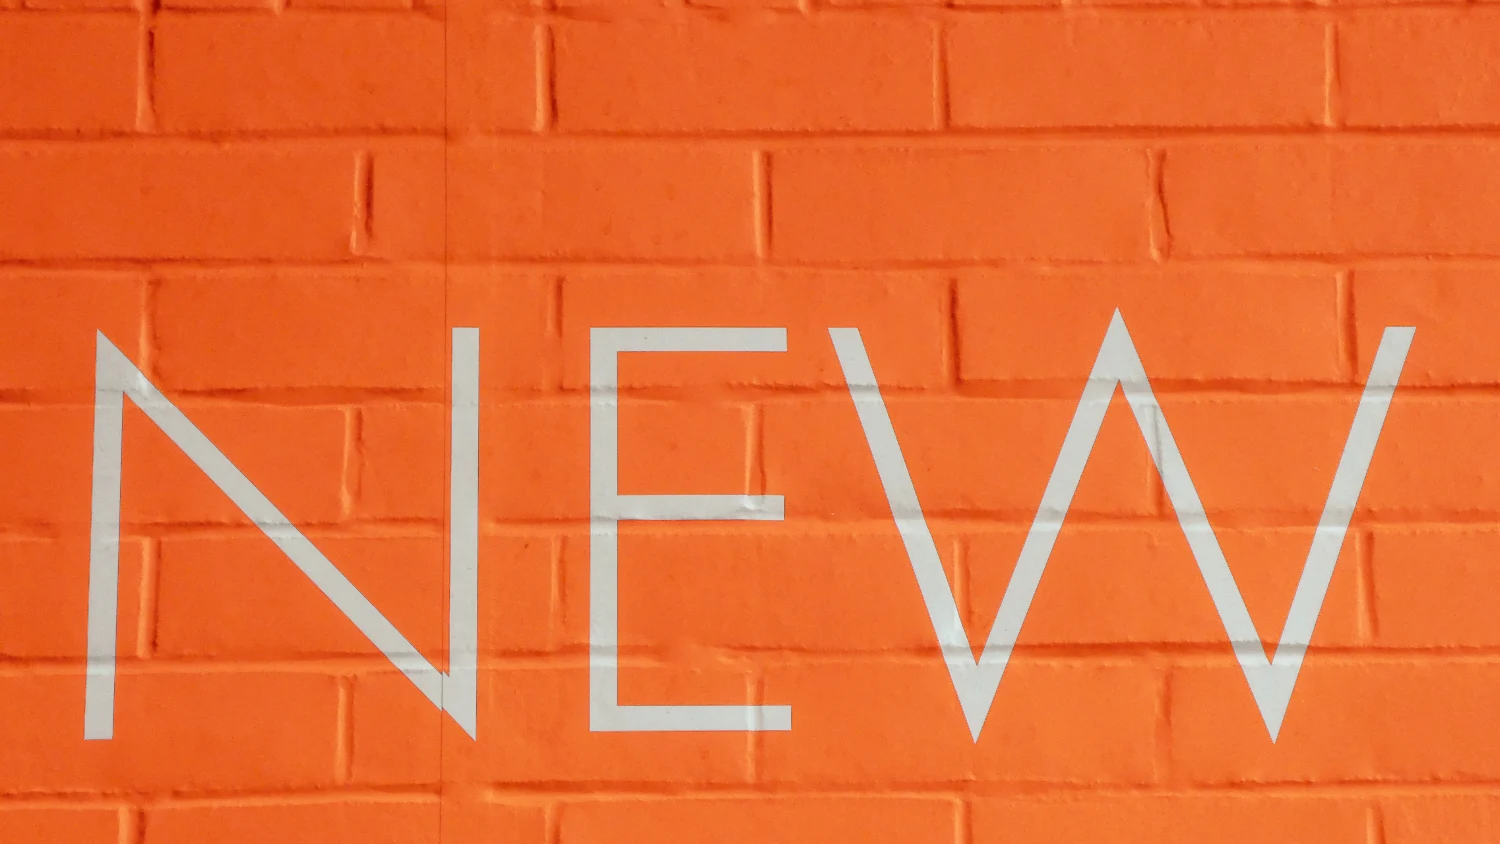 An orange brick wall with the word 'New' on it.